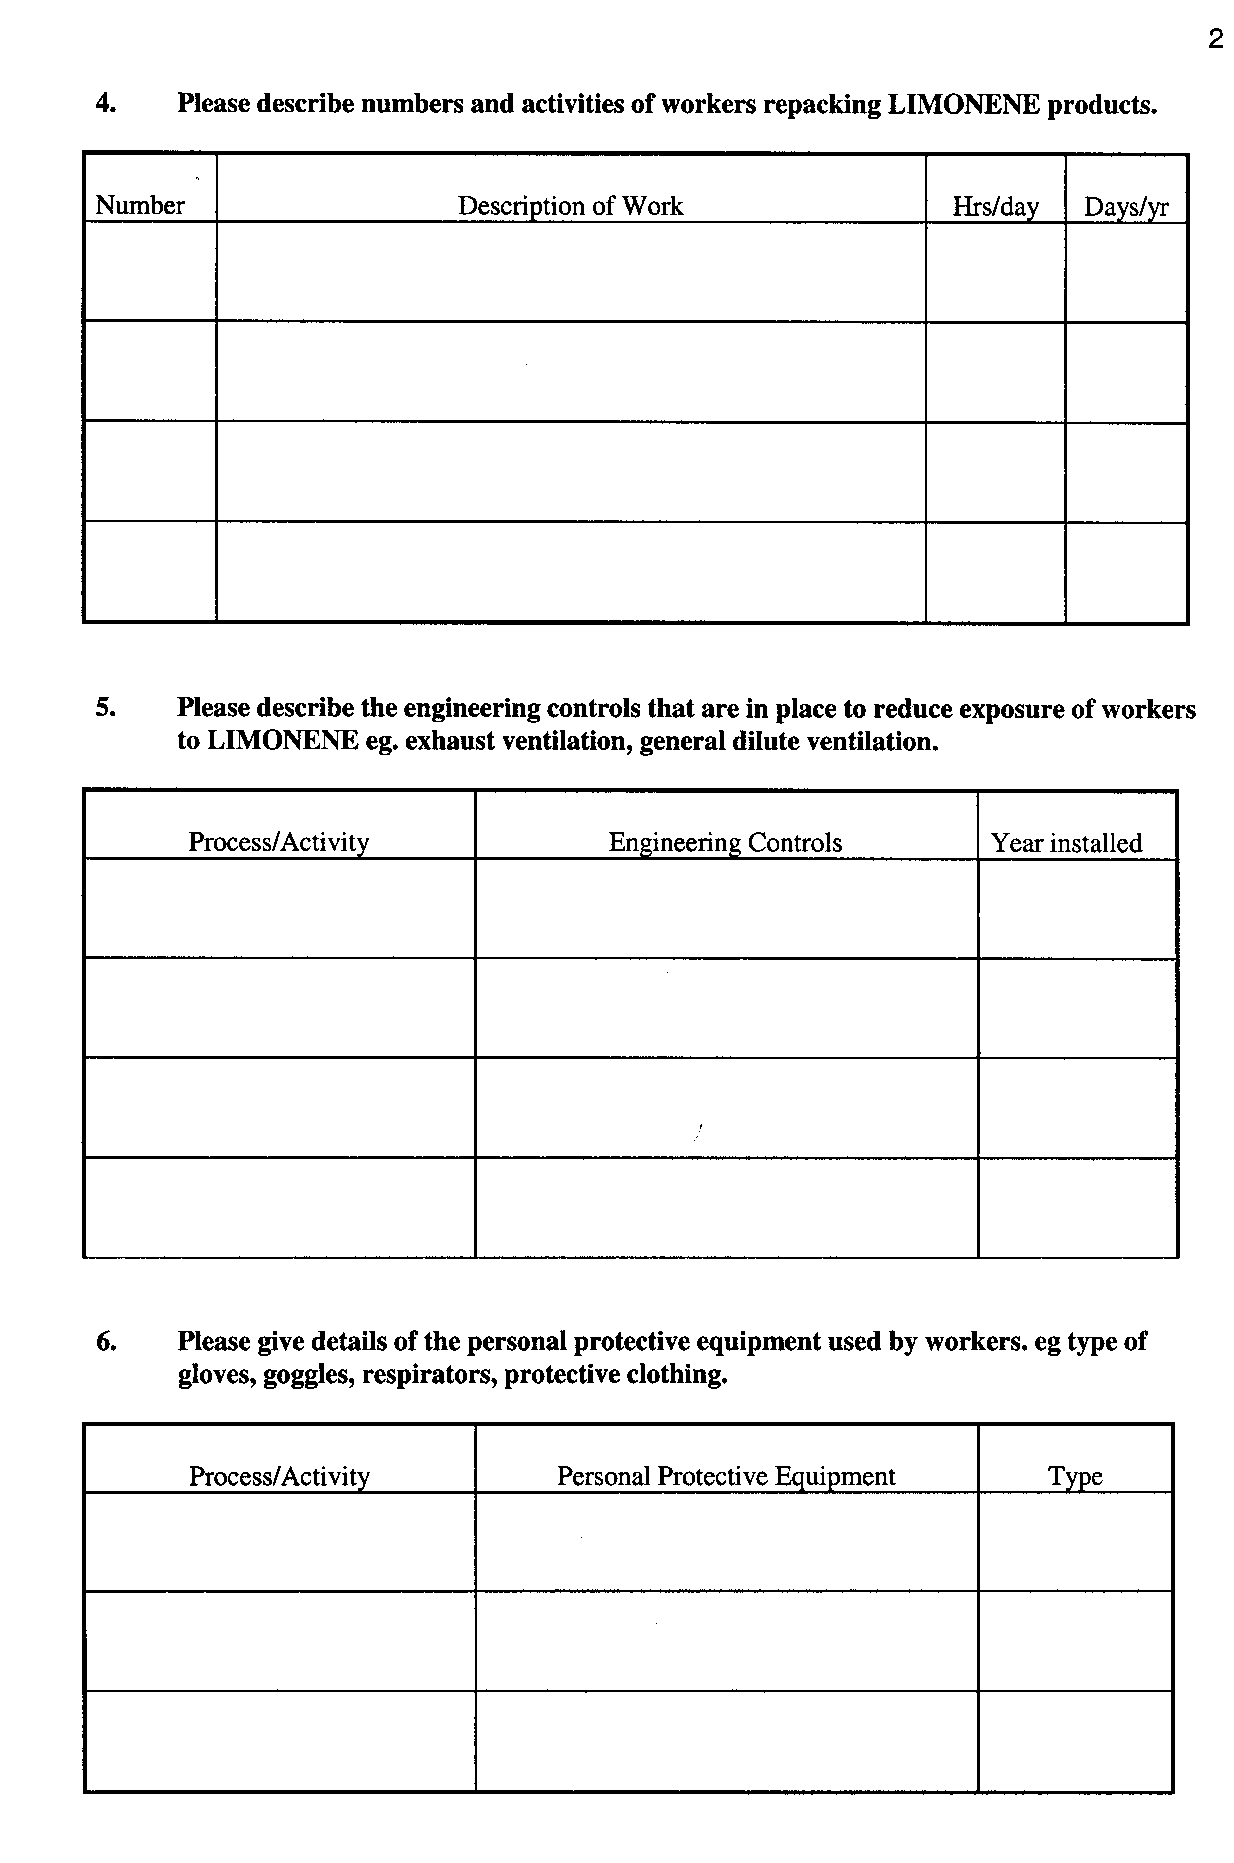 3rd page survey